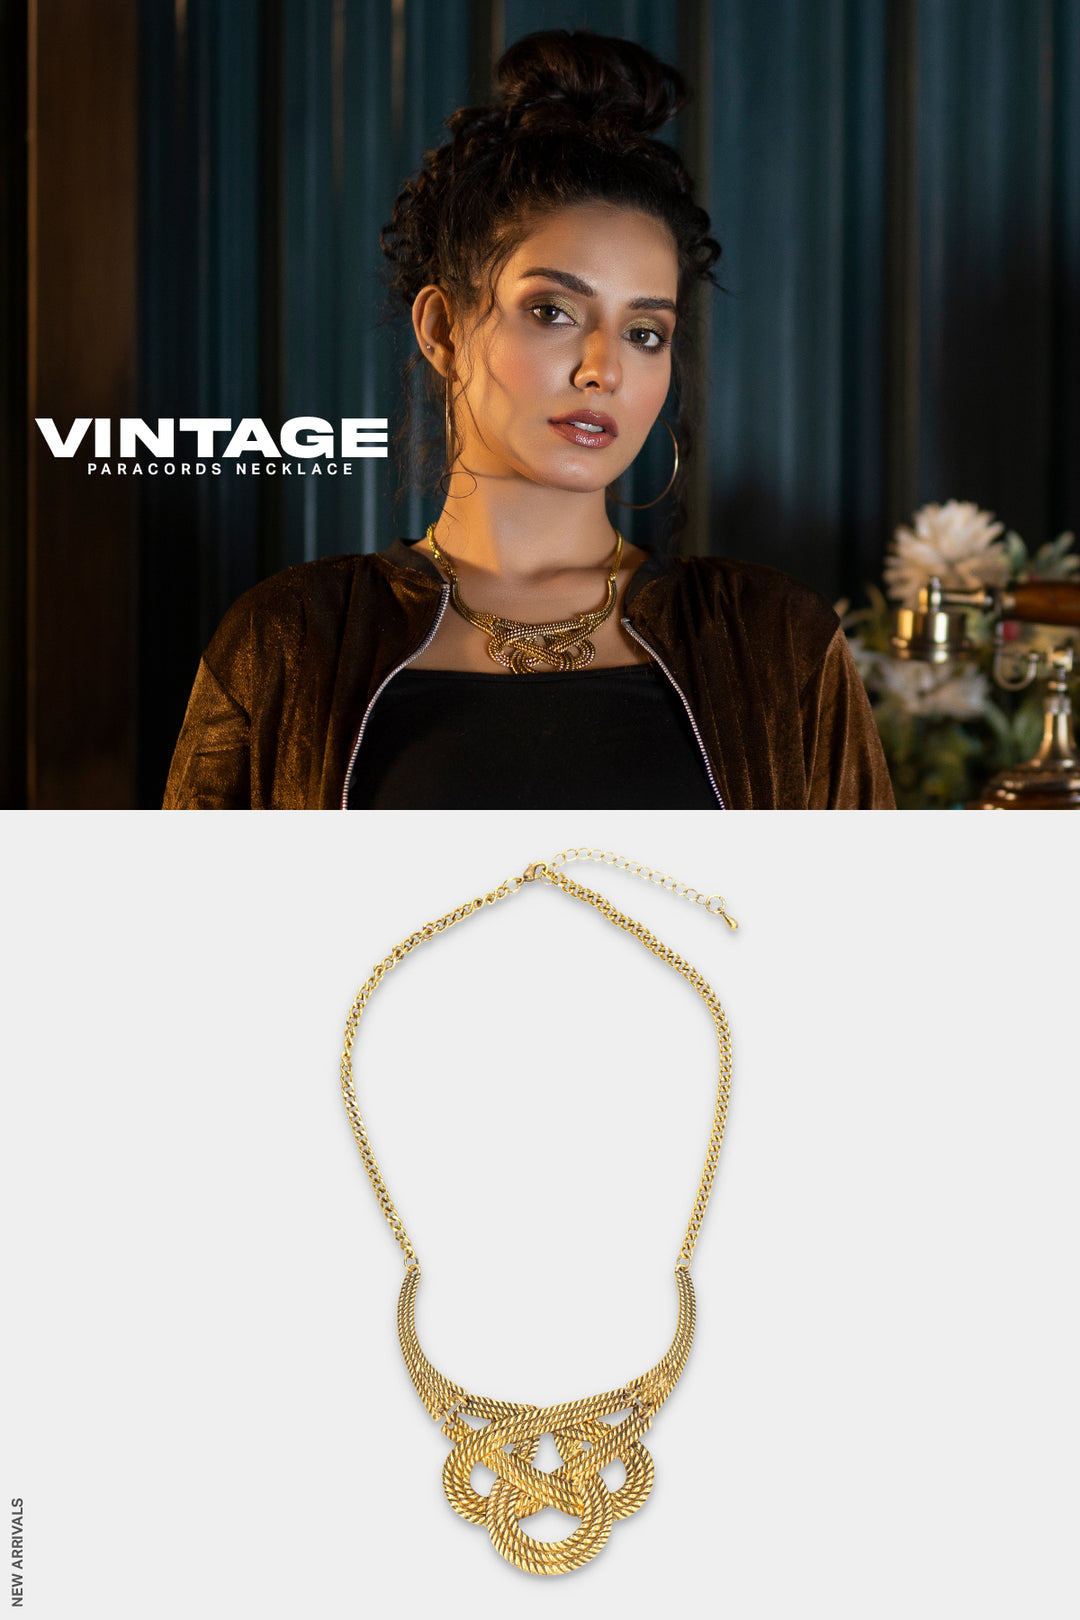 Vintage Paracords Necklace - W21 - WJW0010